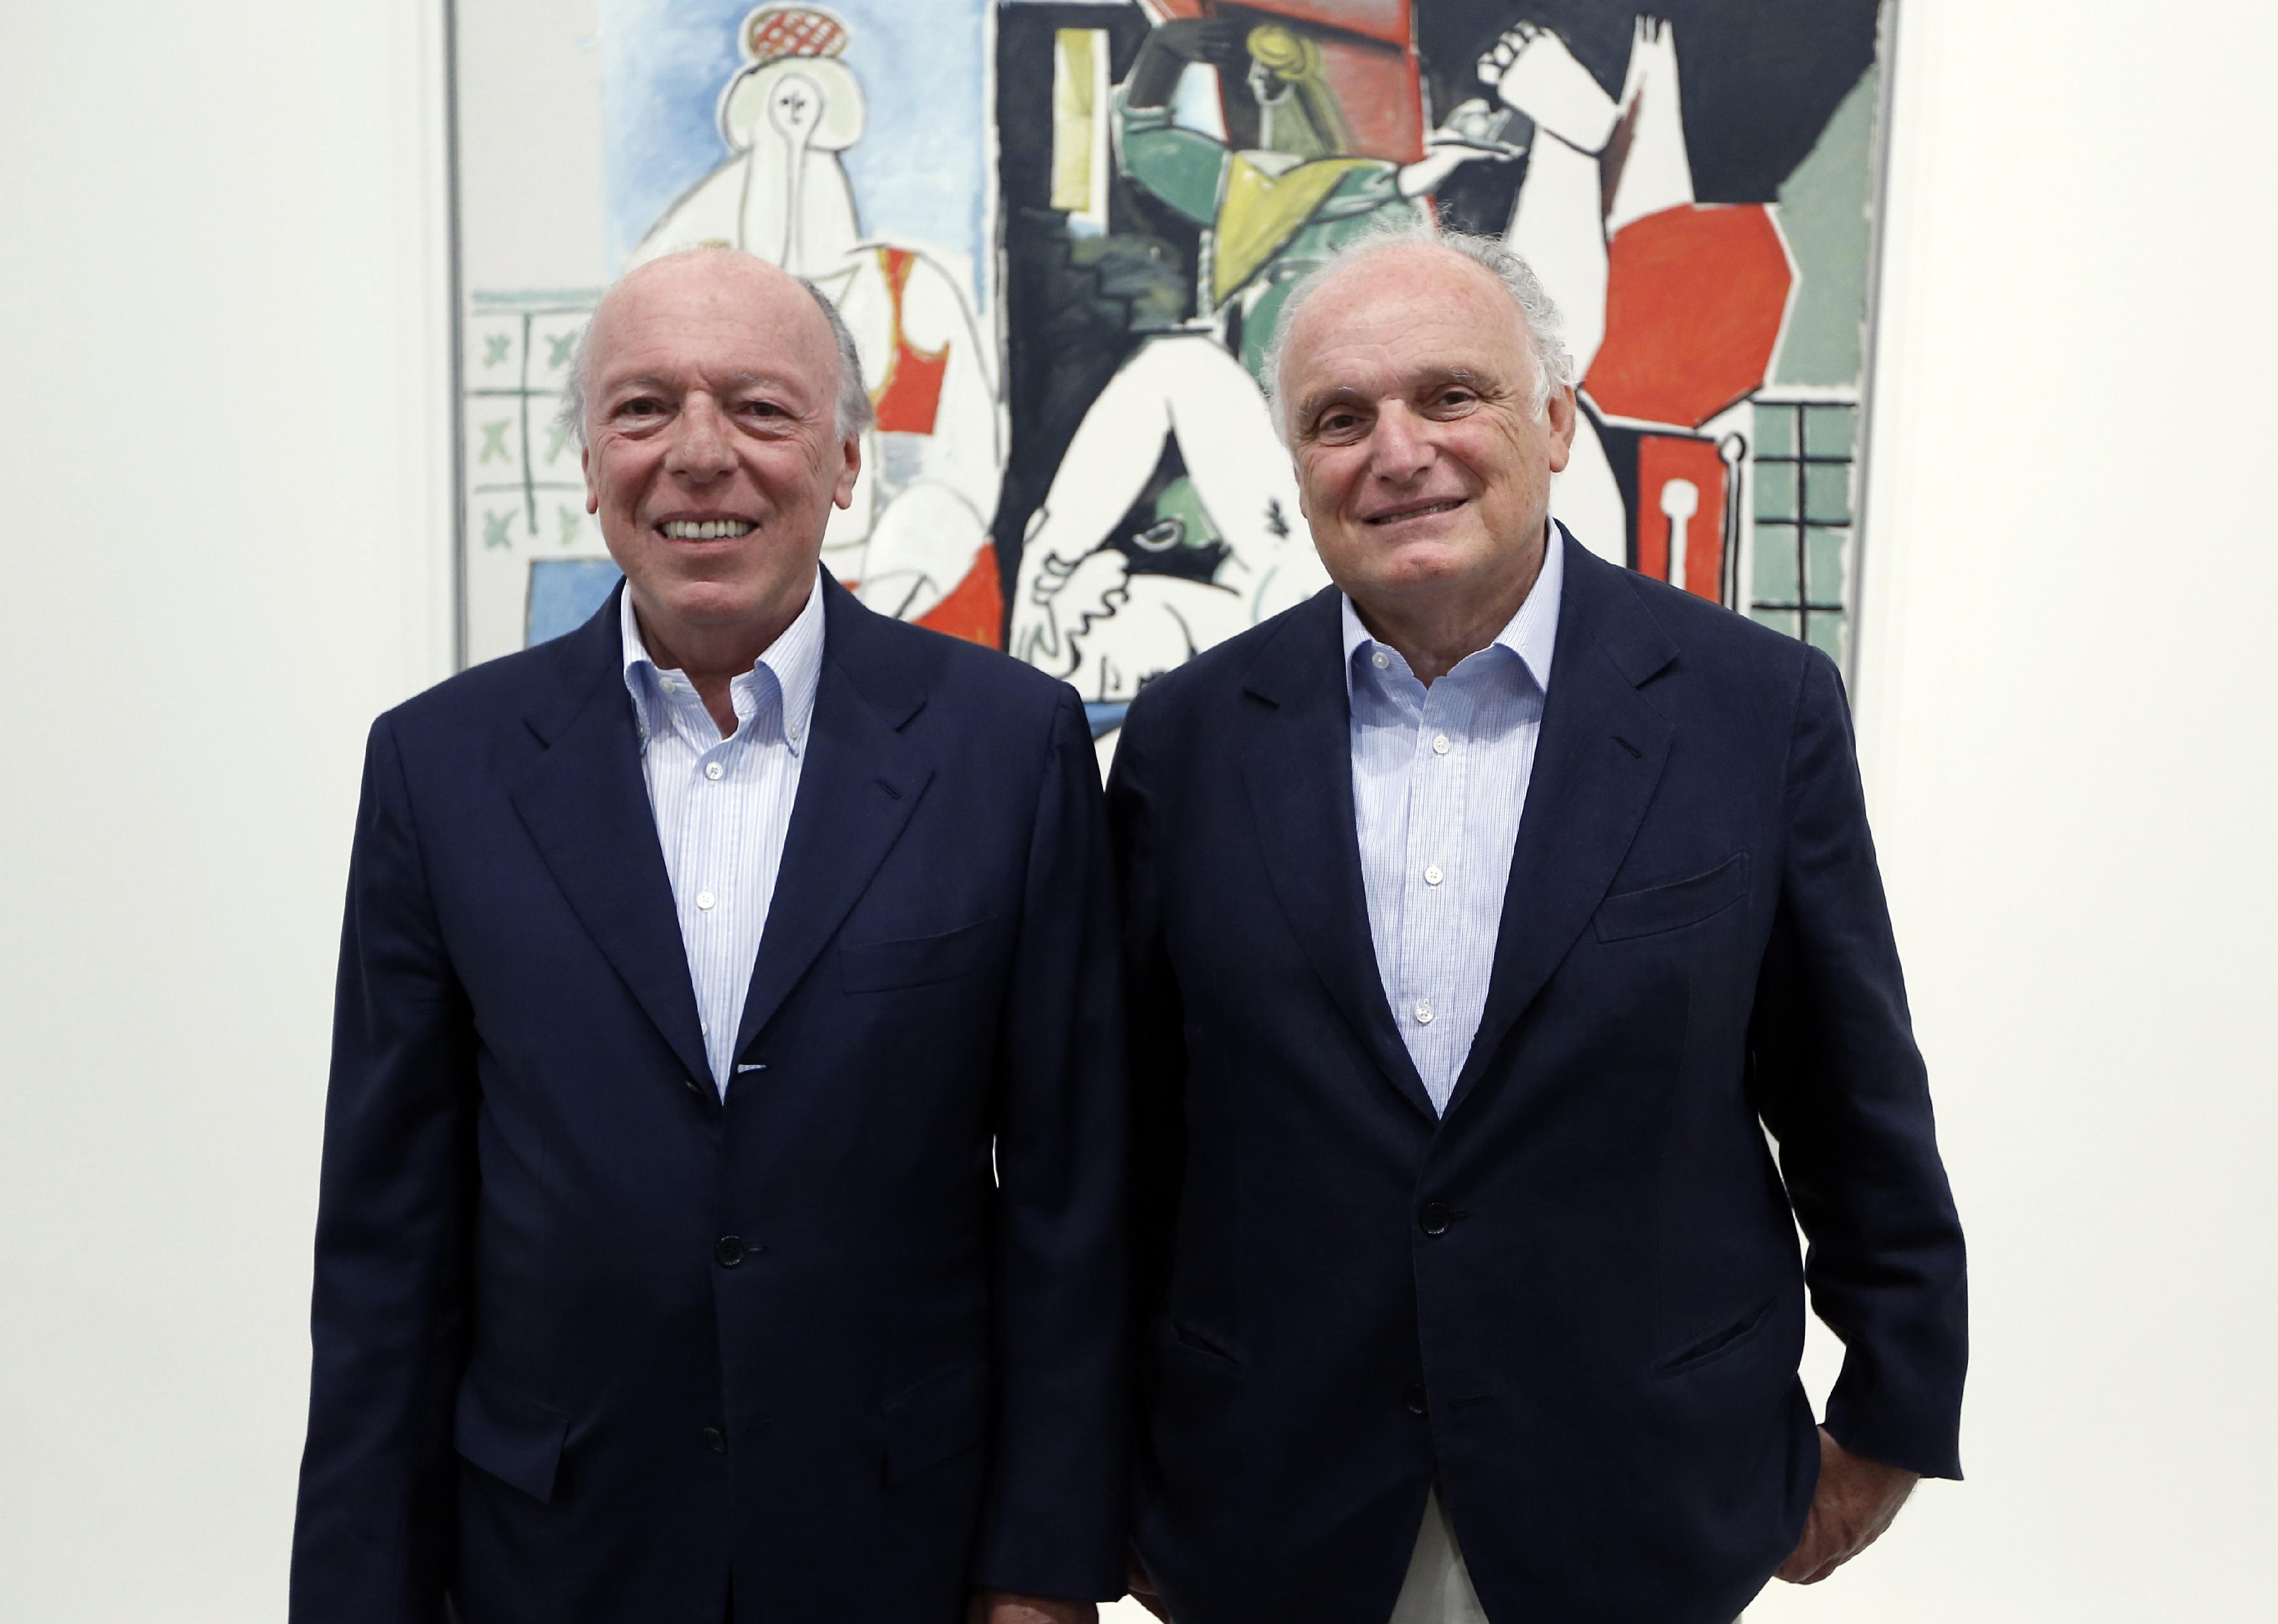 David Nahmad and Ezra Nahmad pose in a room of an exhibition dedicated to Pablo Picasso.